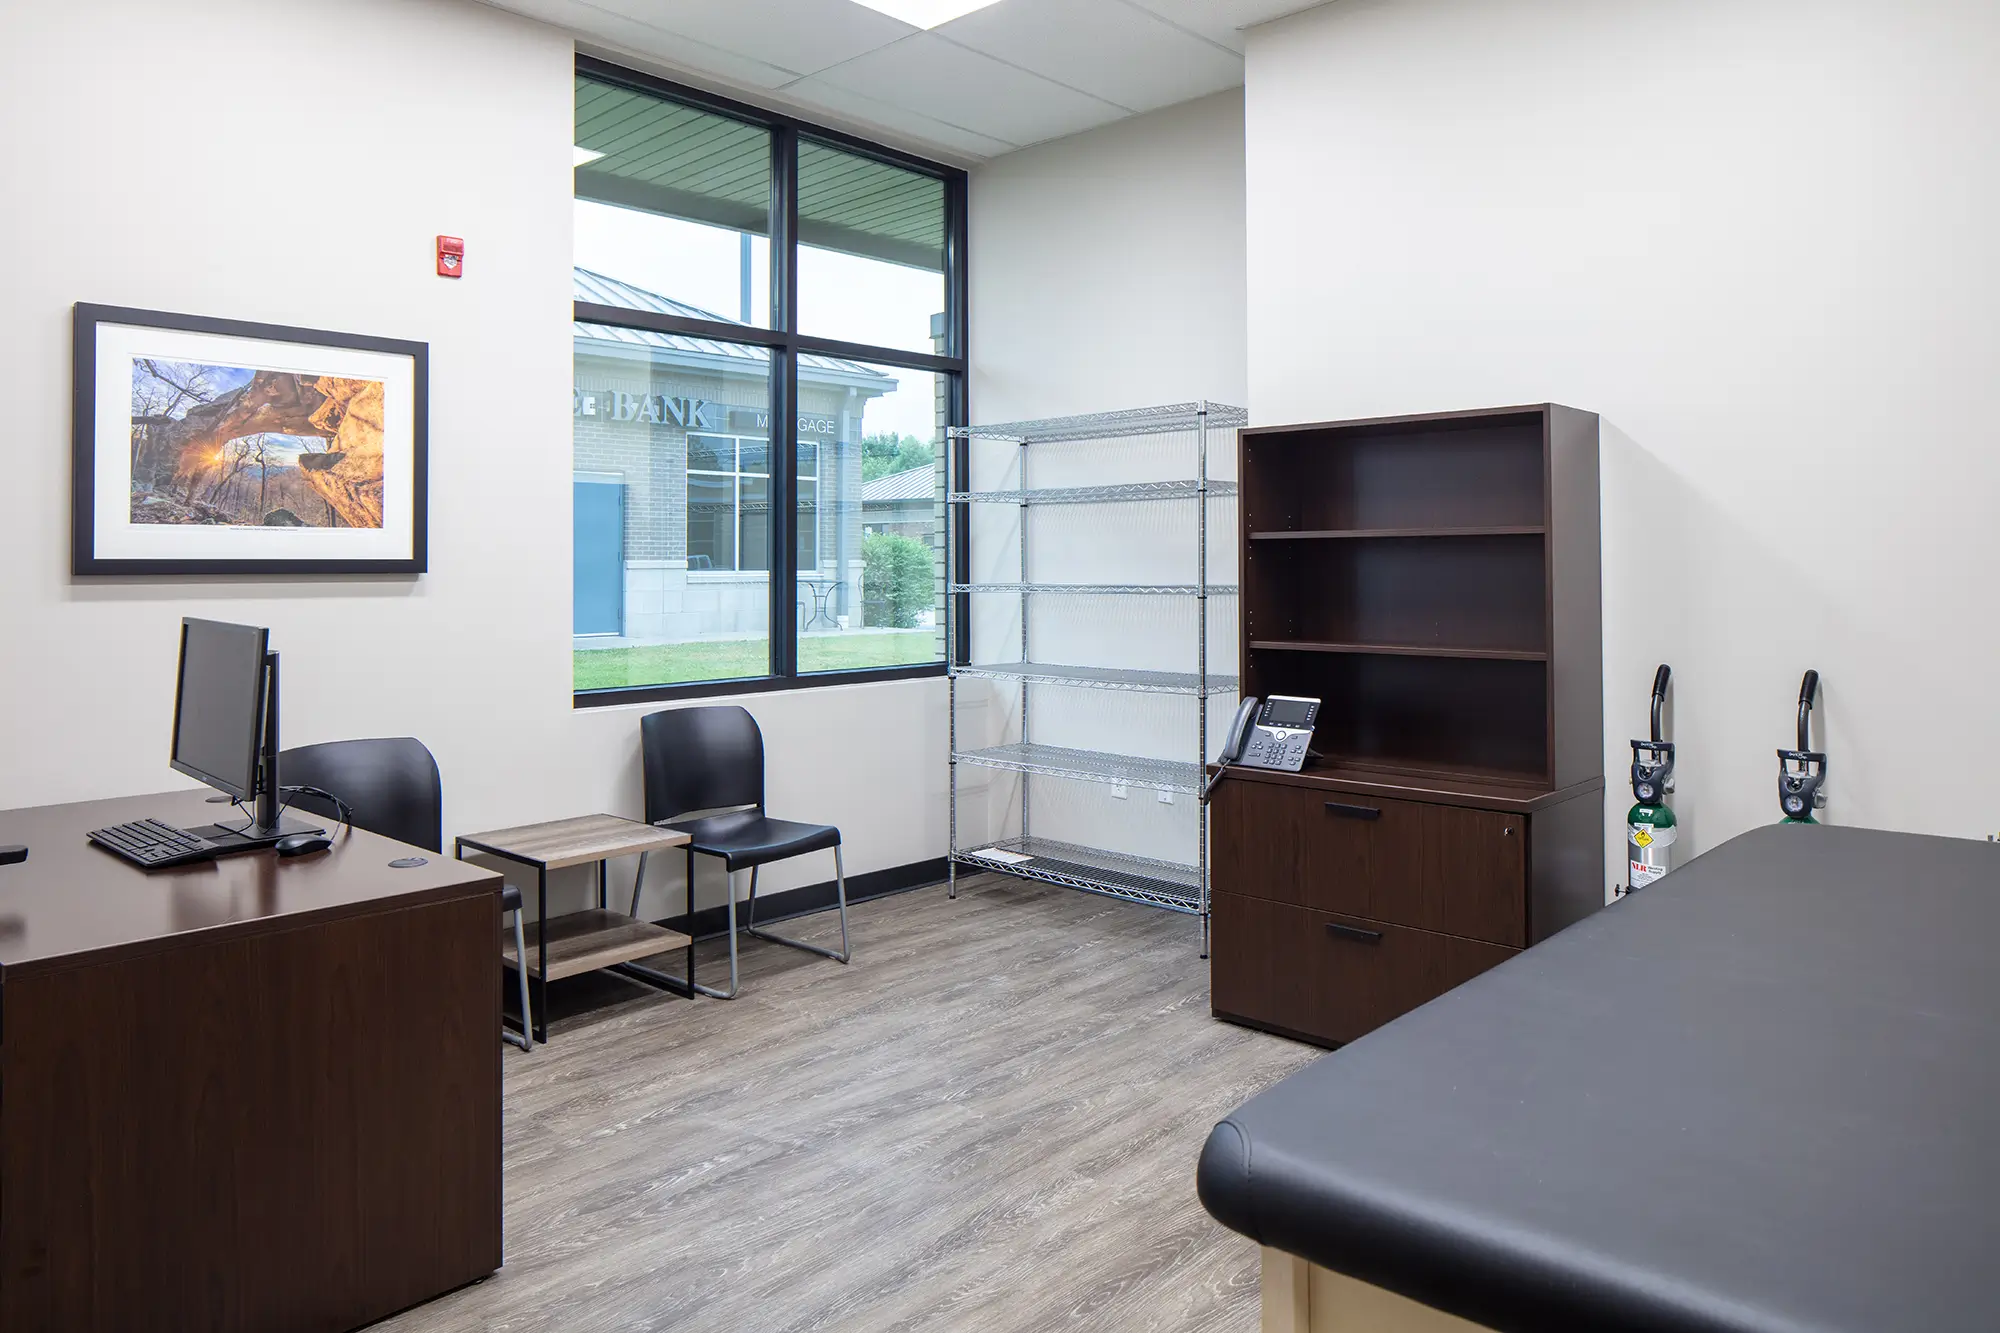 Pain Treatment Centers of America treatment room